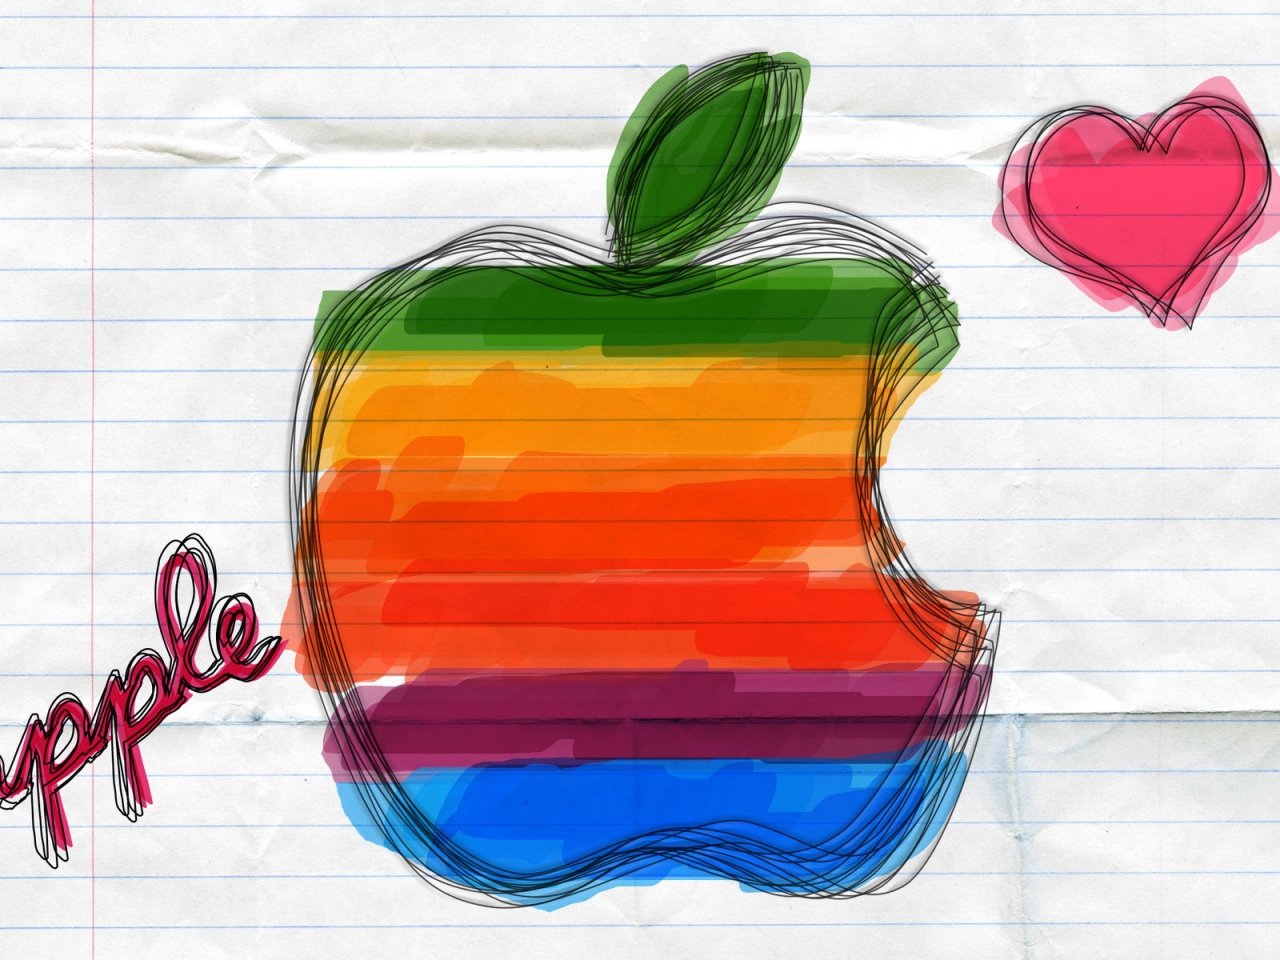 Colourful Apple logo for 1280 x 960 resolution